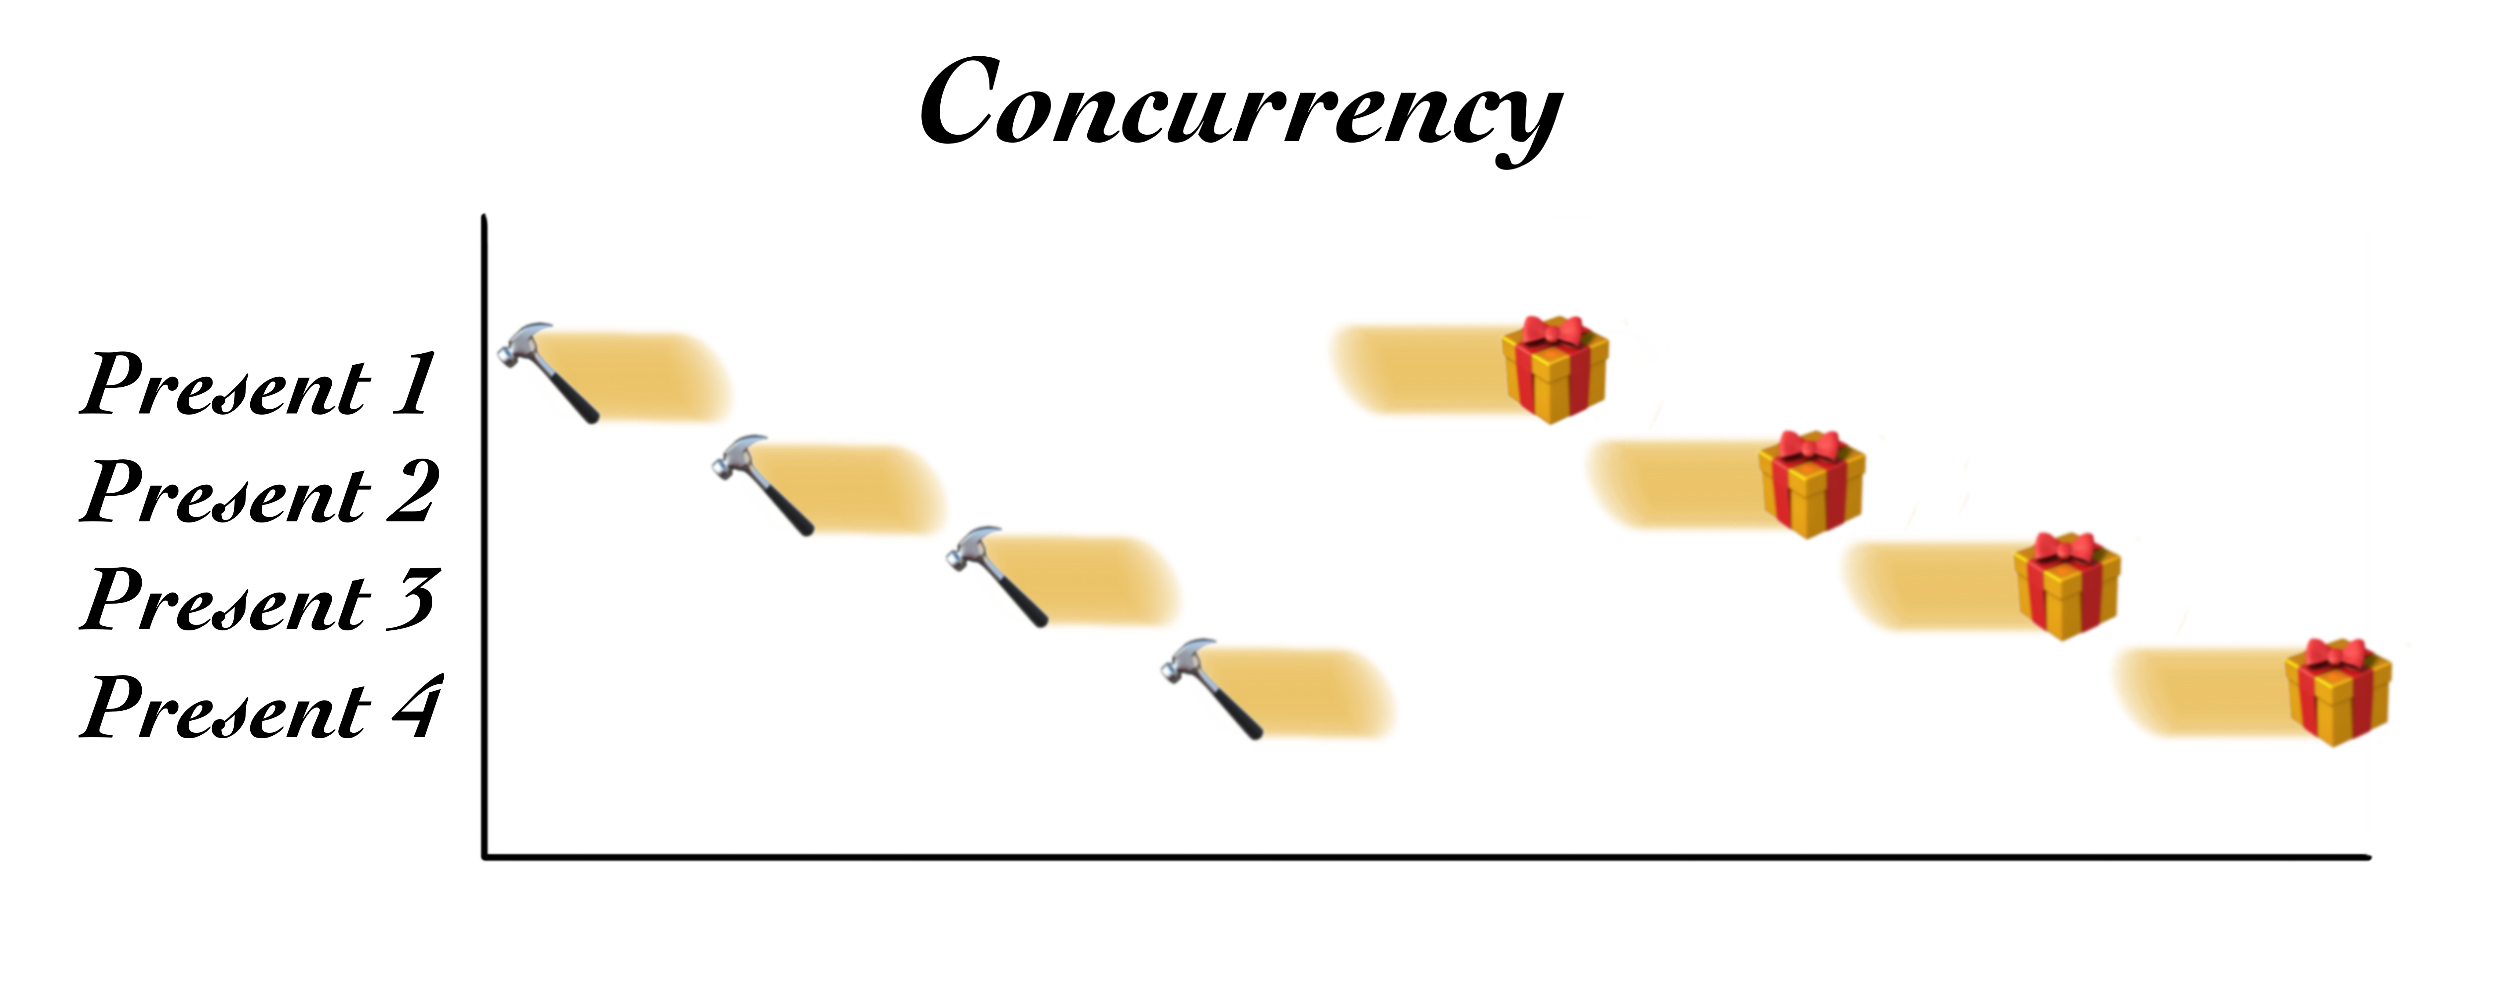 Illustration of concurrency